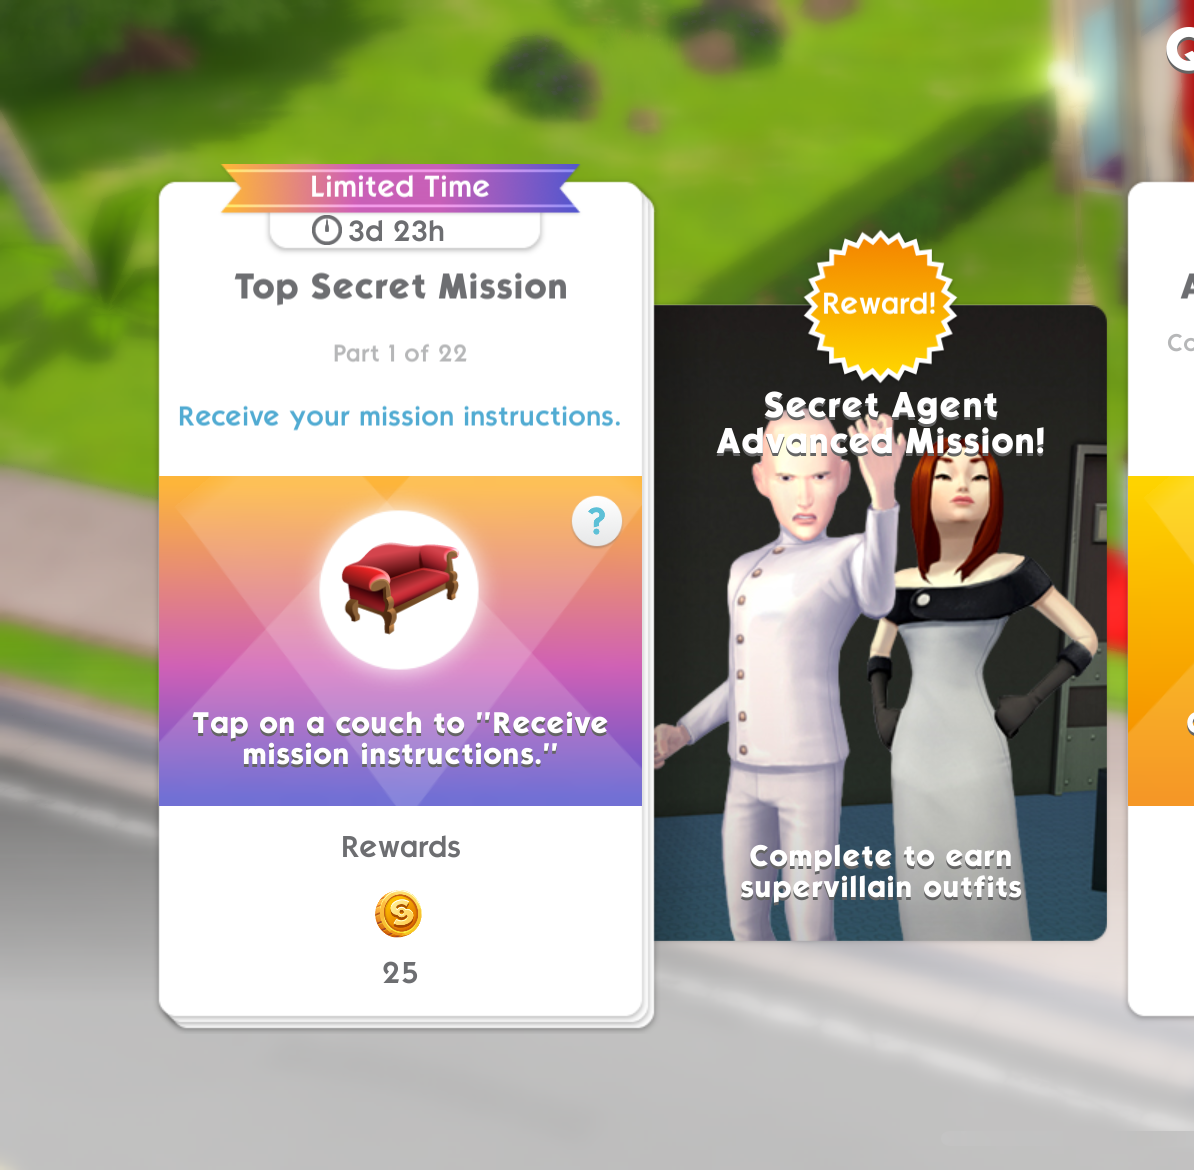 The Sims Mobile - How To Get More Simoleons, SimCash, CupCakes And